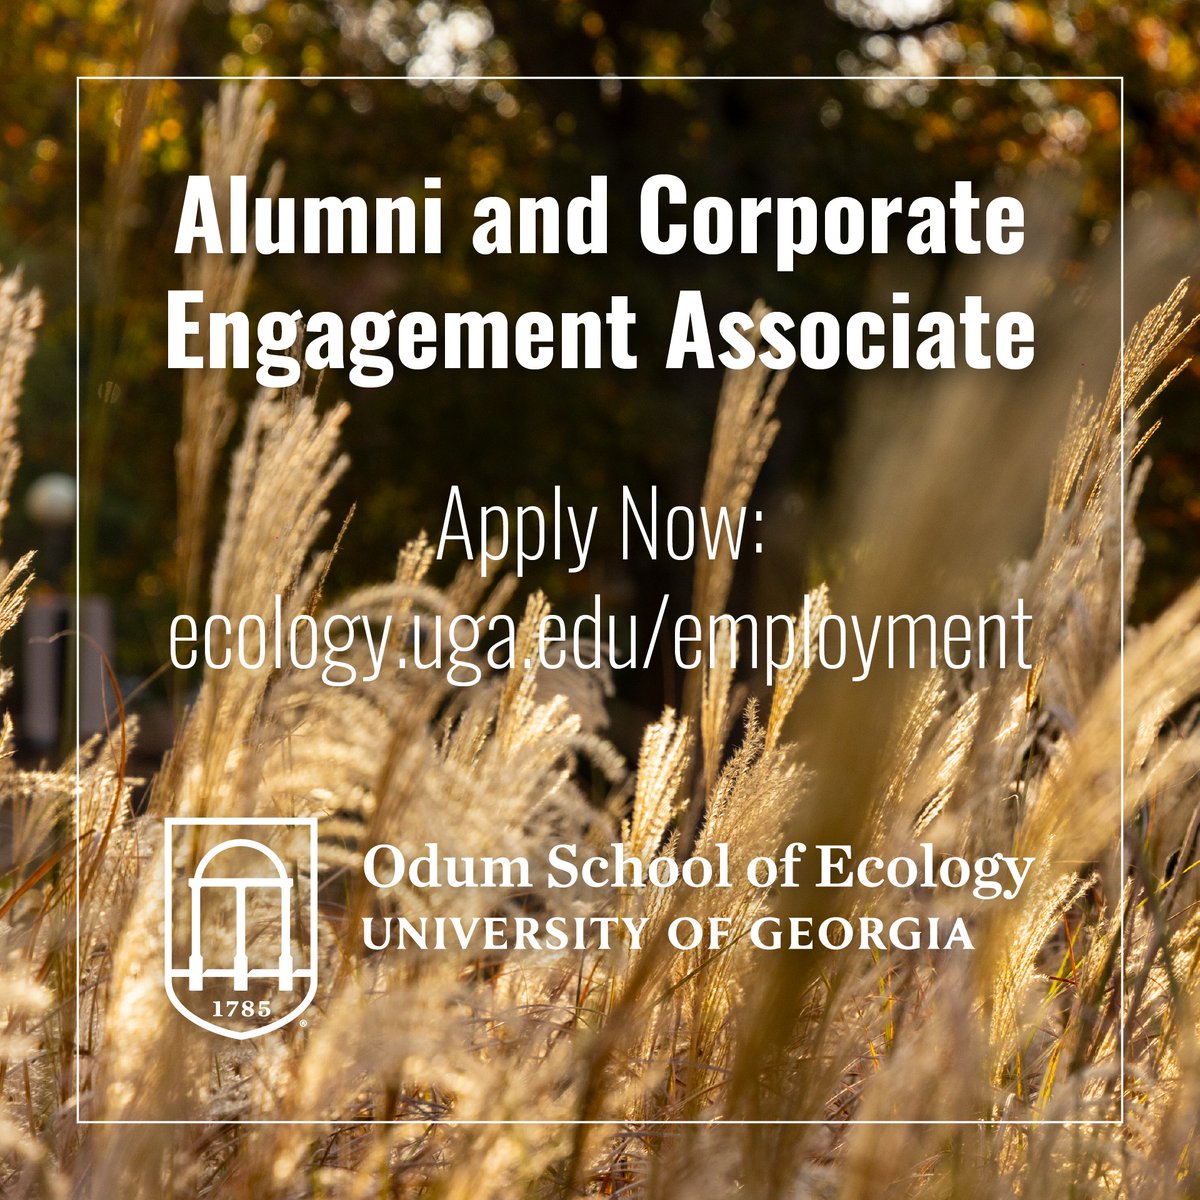 We're hiring! Two positions open: PR & Media Specialist and Alumni and Corporate Engagement Associate. Join our small but impactful community! More info 👉 t.uga.edu/9M9